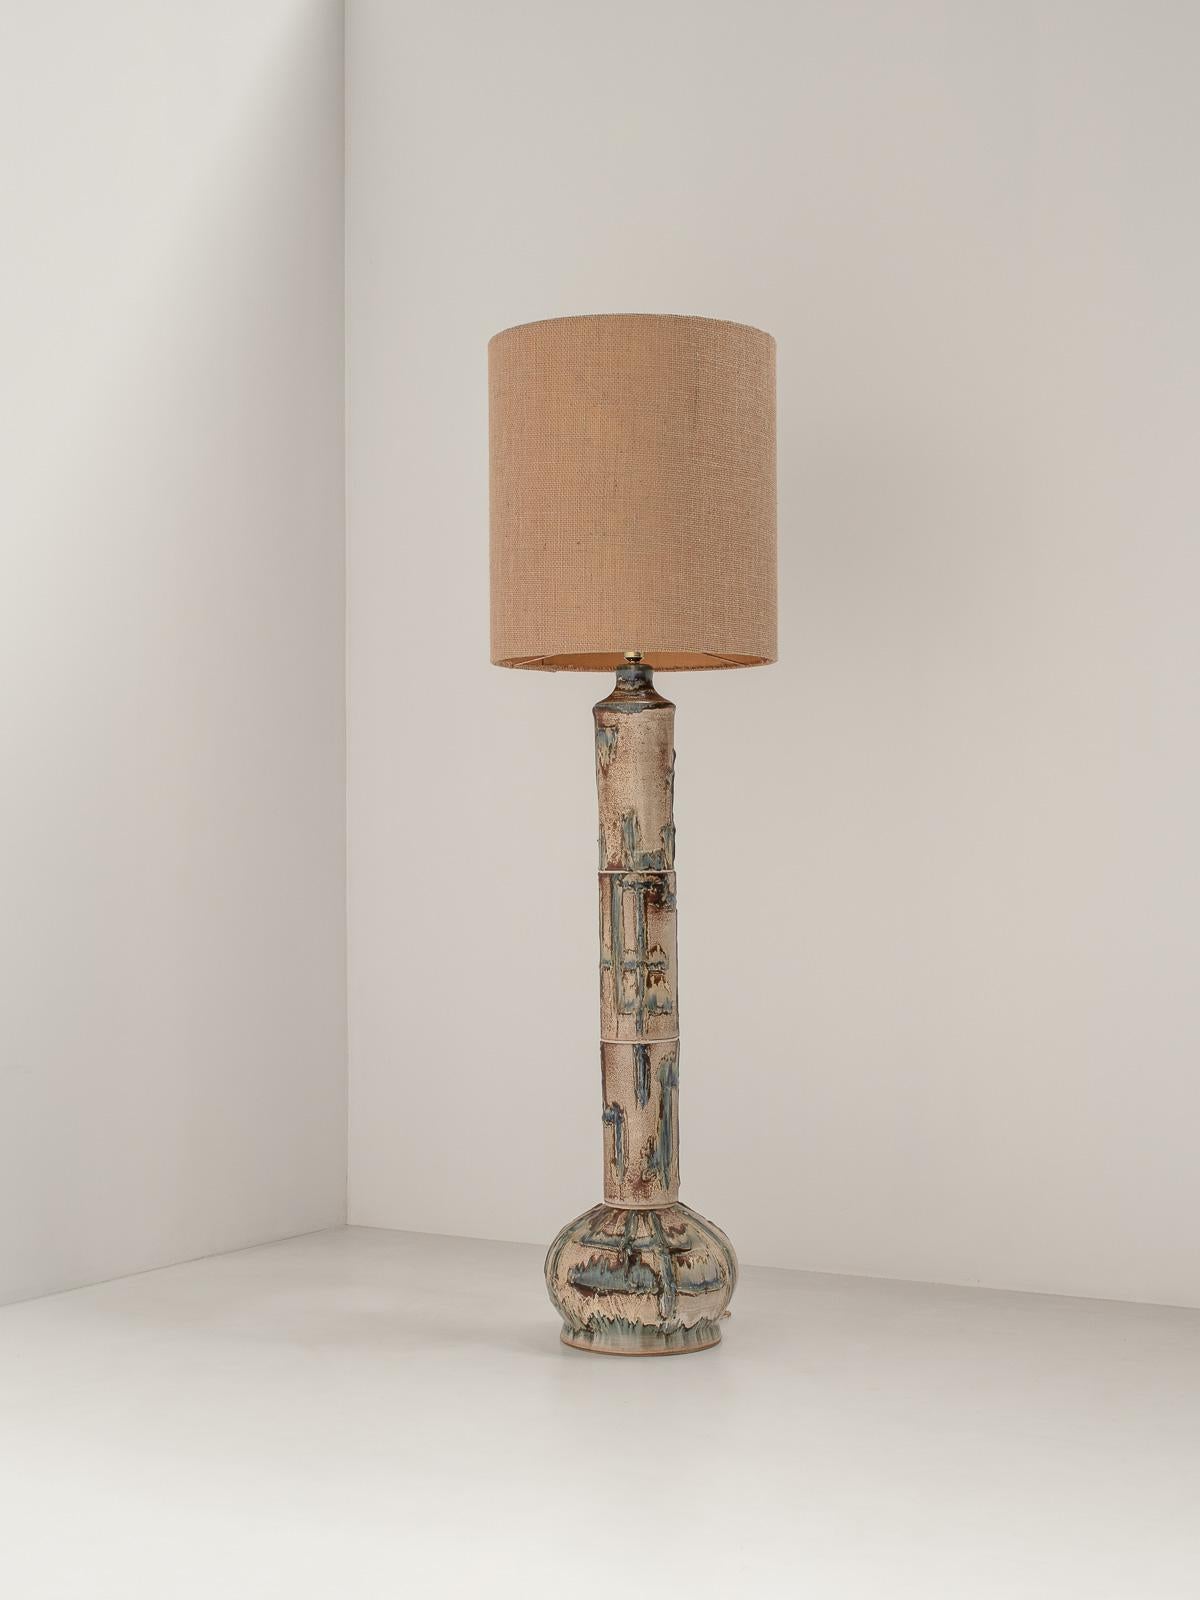 Exceptional Danish Ceramic Floor Lamp attributed to Viggo Kyhn, 1960s, Mid-century, Scandinavian.

Elegant, warm, and soft are the words that come to mind with this lamp. The ceramic base has been hand-made and features beautiful cream, beige, baby